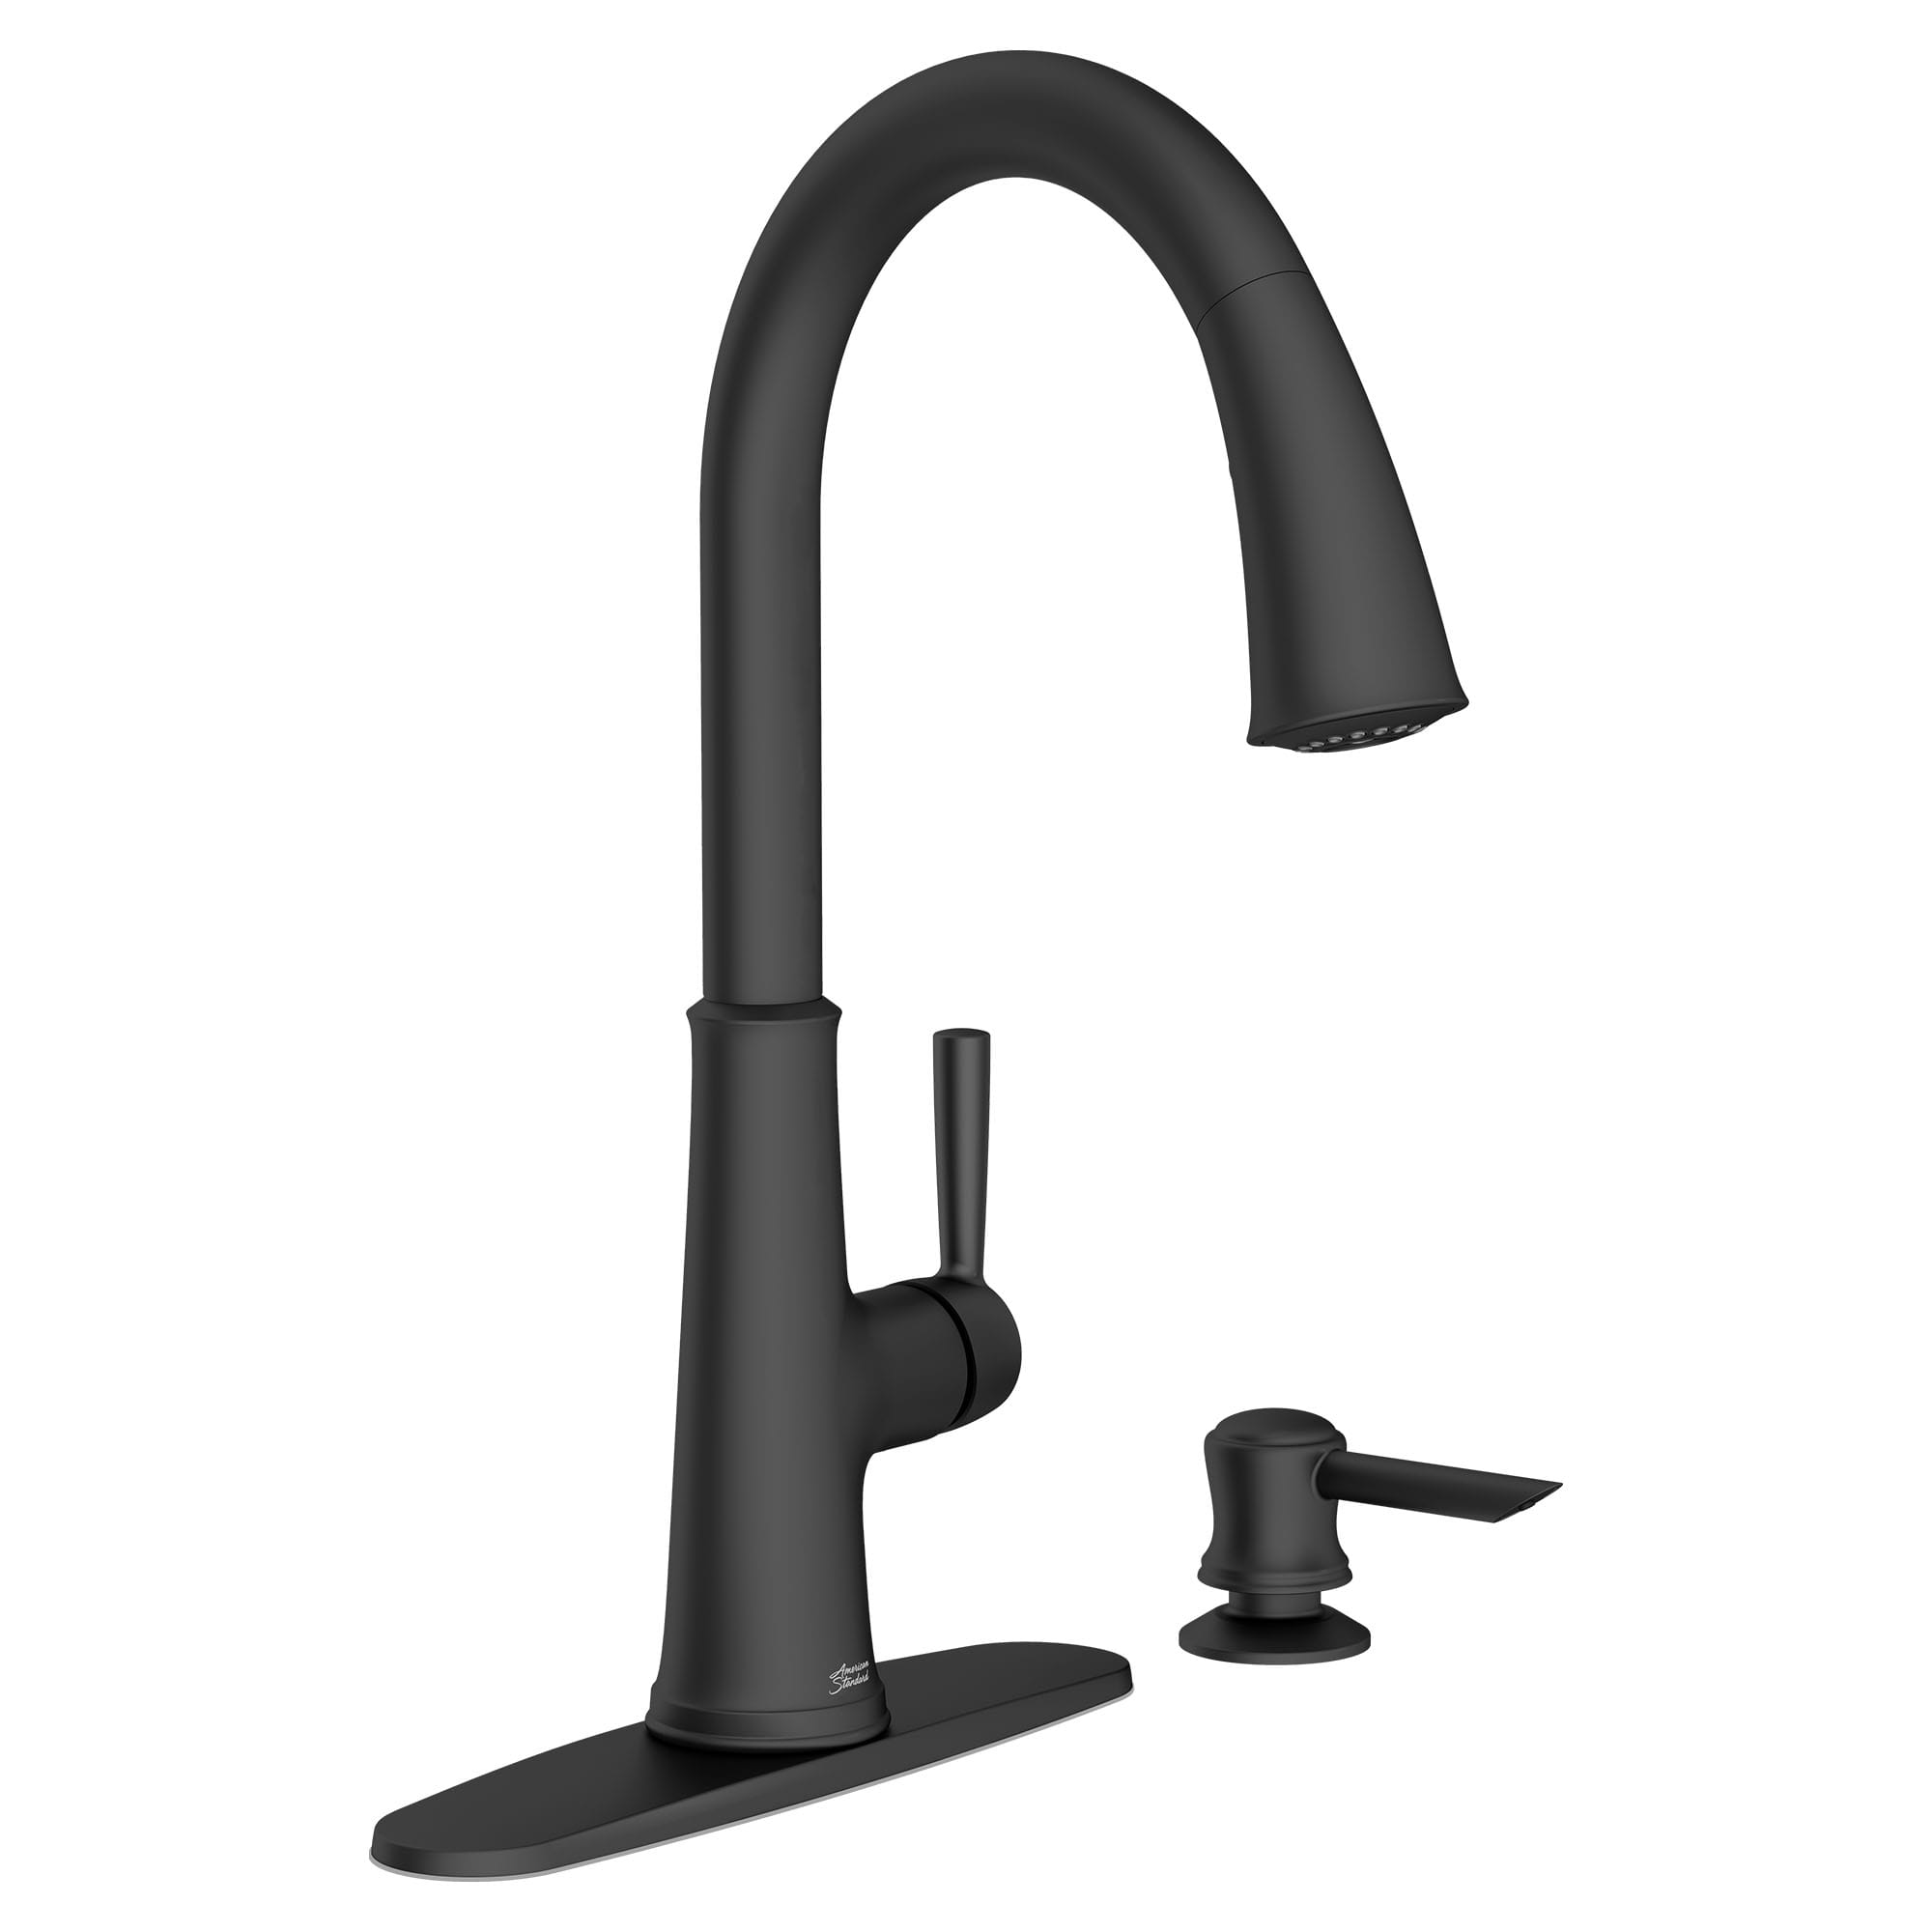 Maven Series 9319300.243 Pull-Down Kitchen Faucet with Soap Dispenser, 1.8 gpm, 1-Faucet Handle